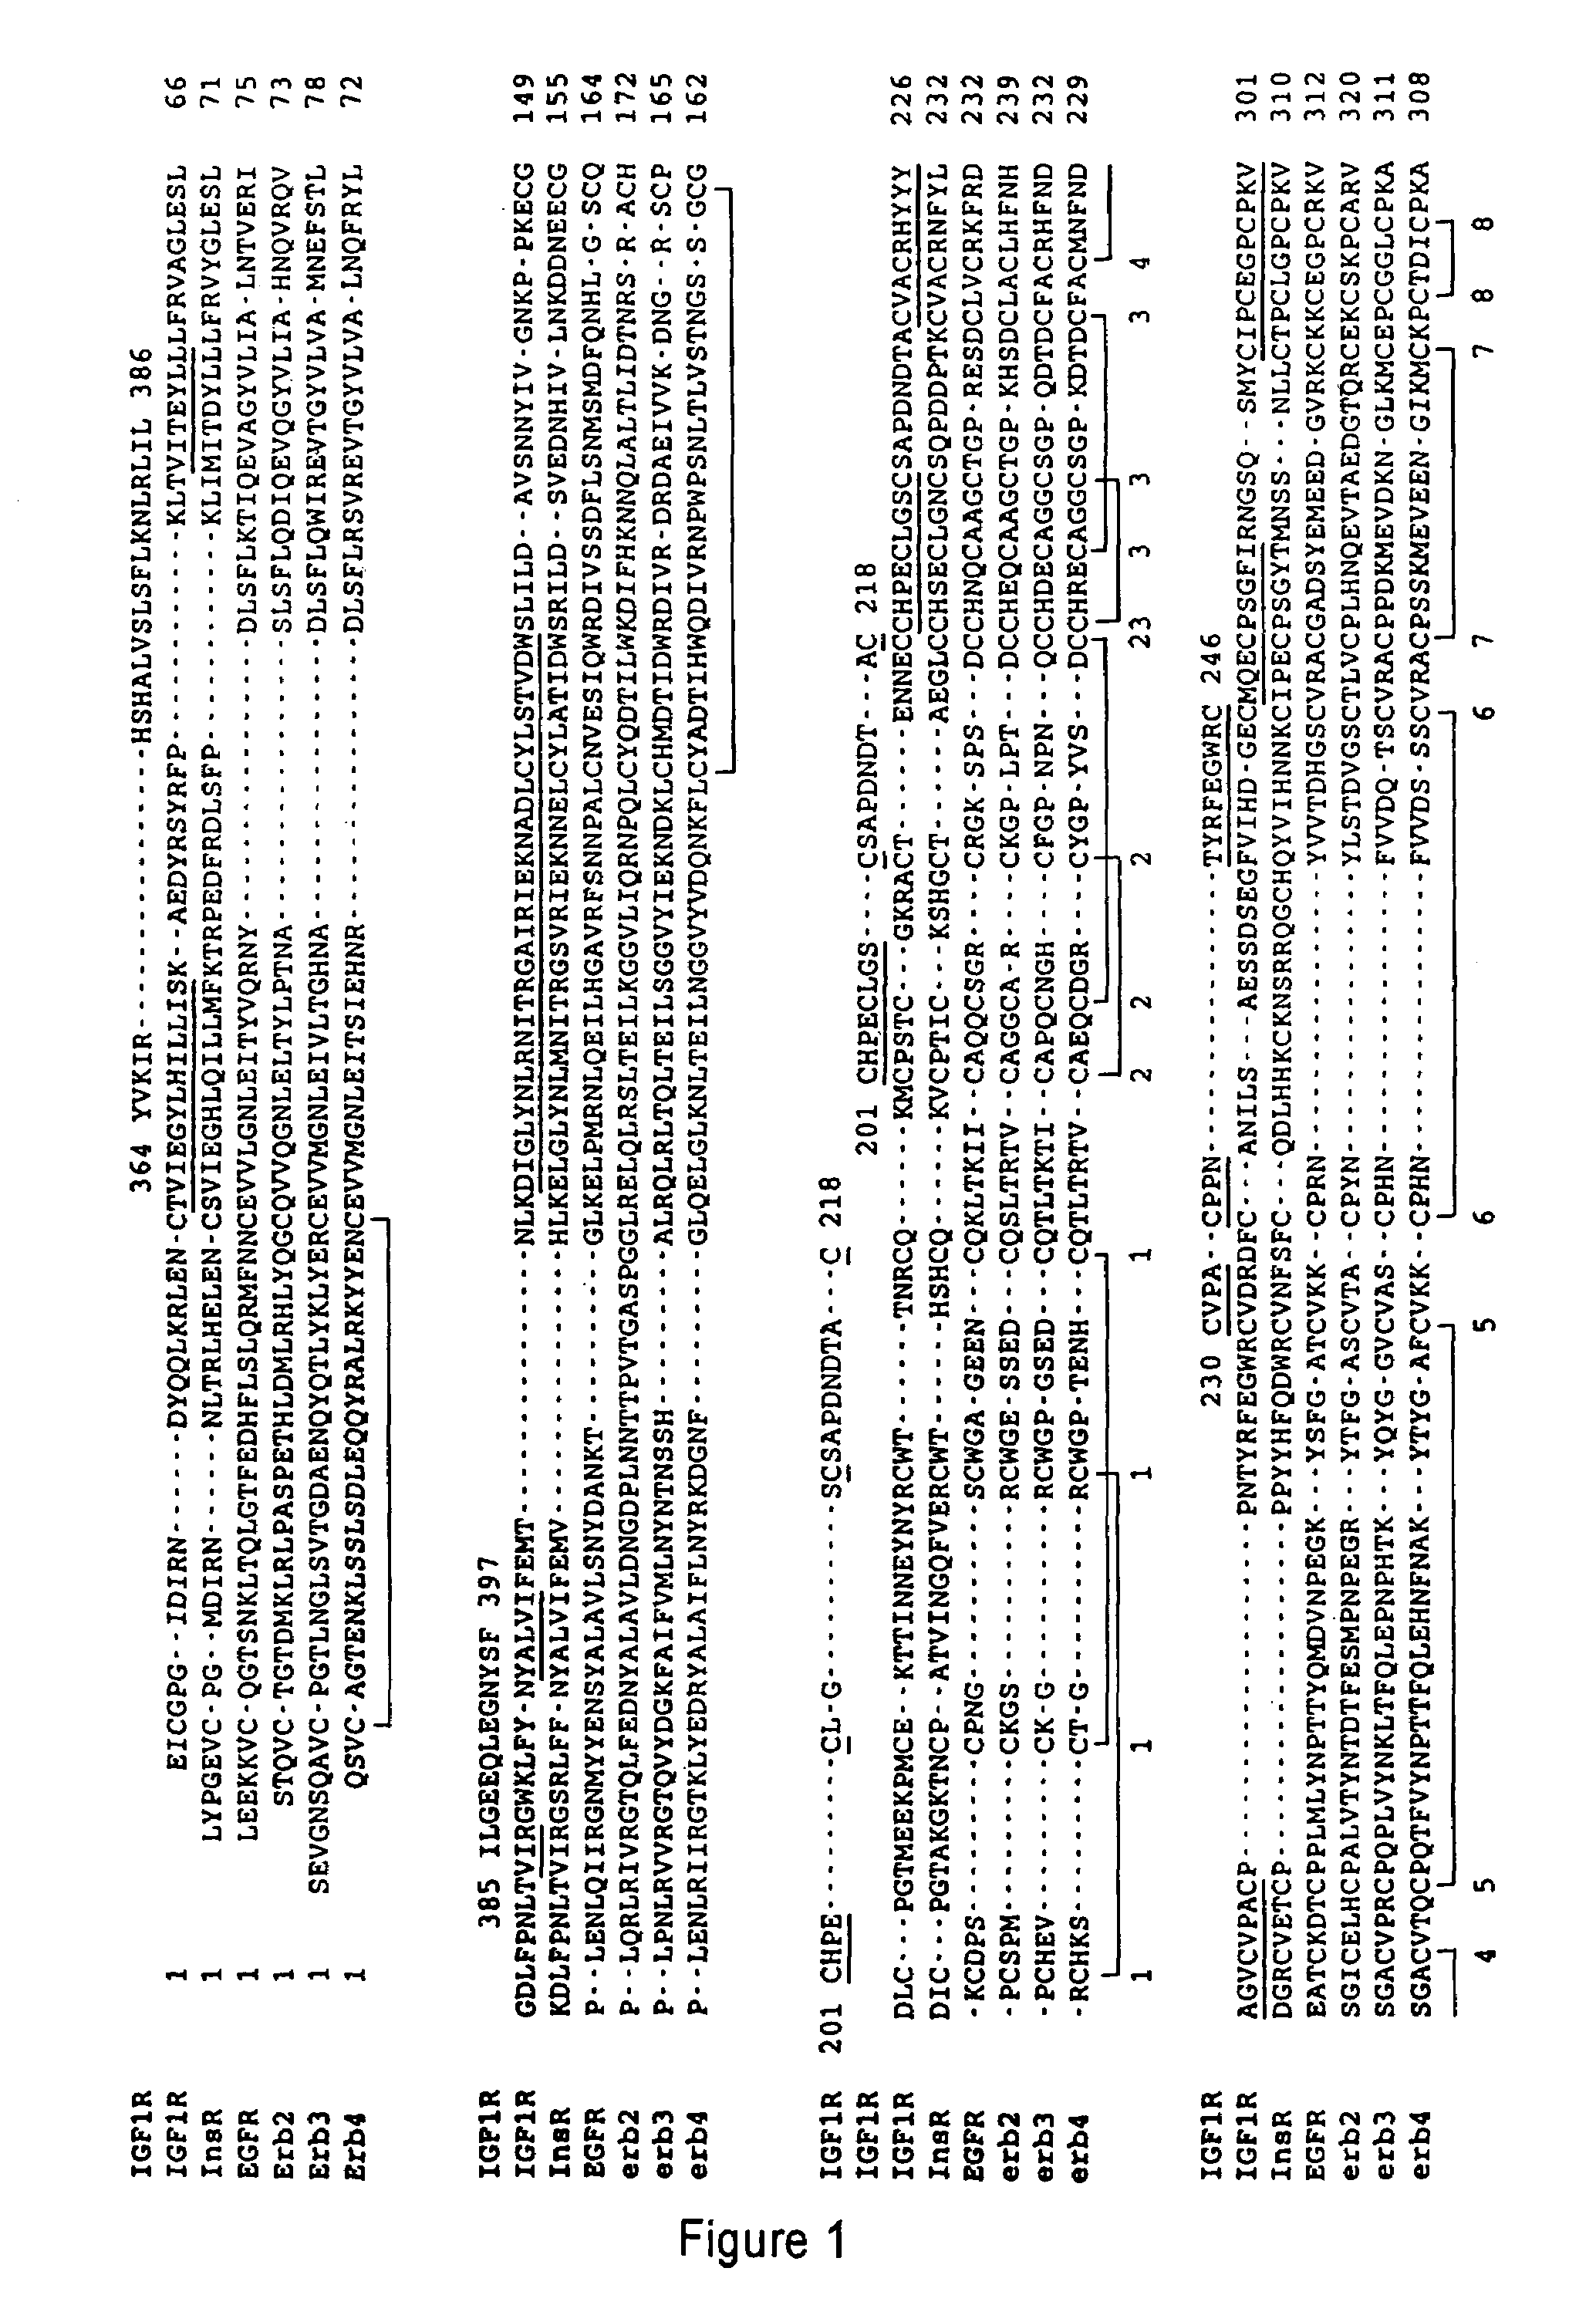 Method of designing agonists and antagonists to EGF receptor family